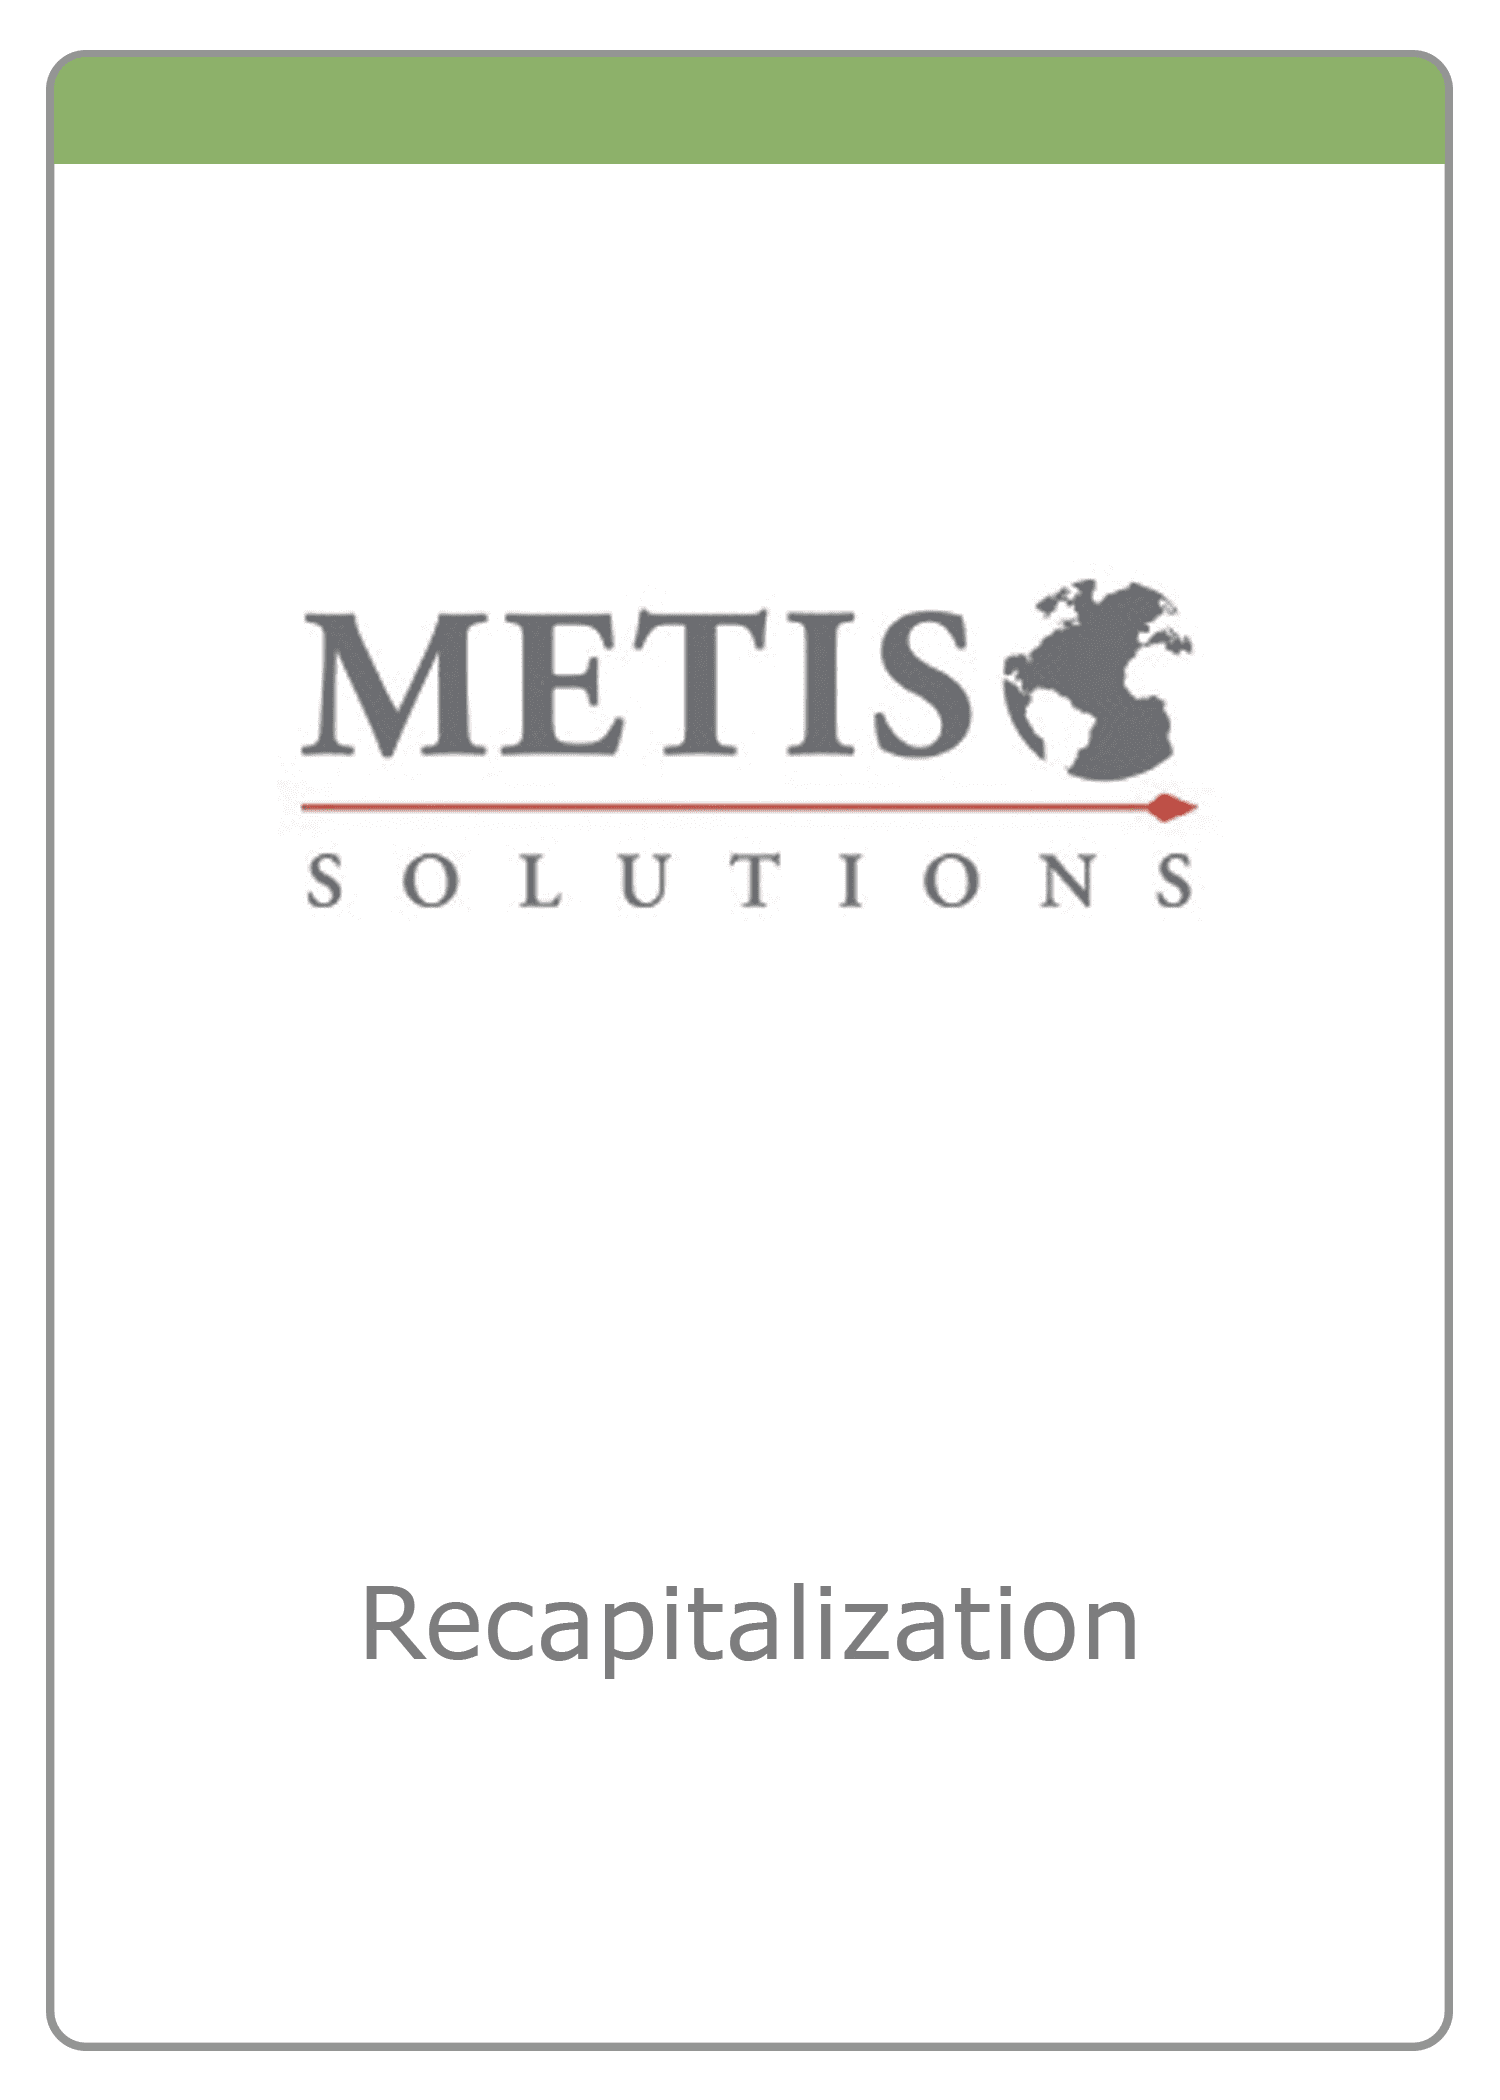 The McLean Group Advises Metis on its Recapitalization